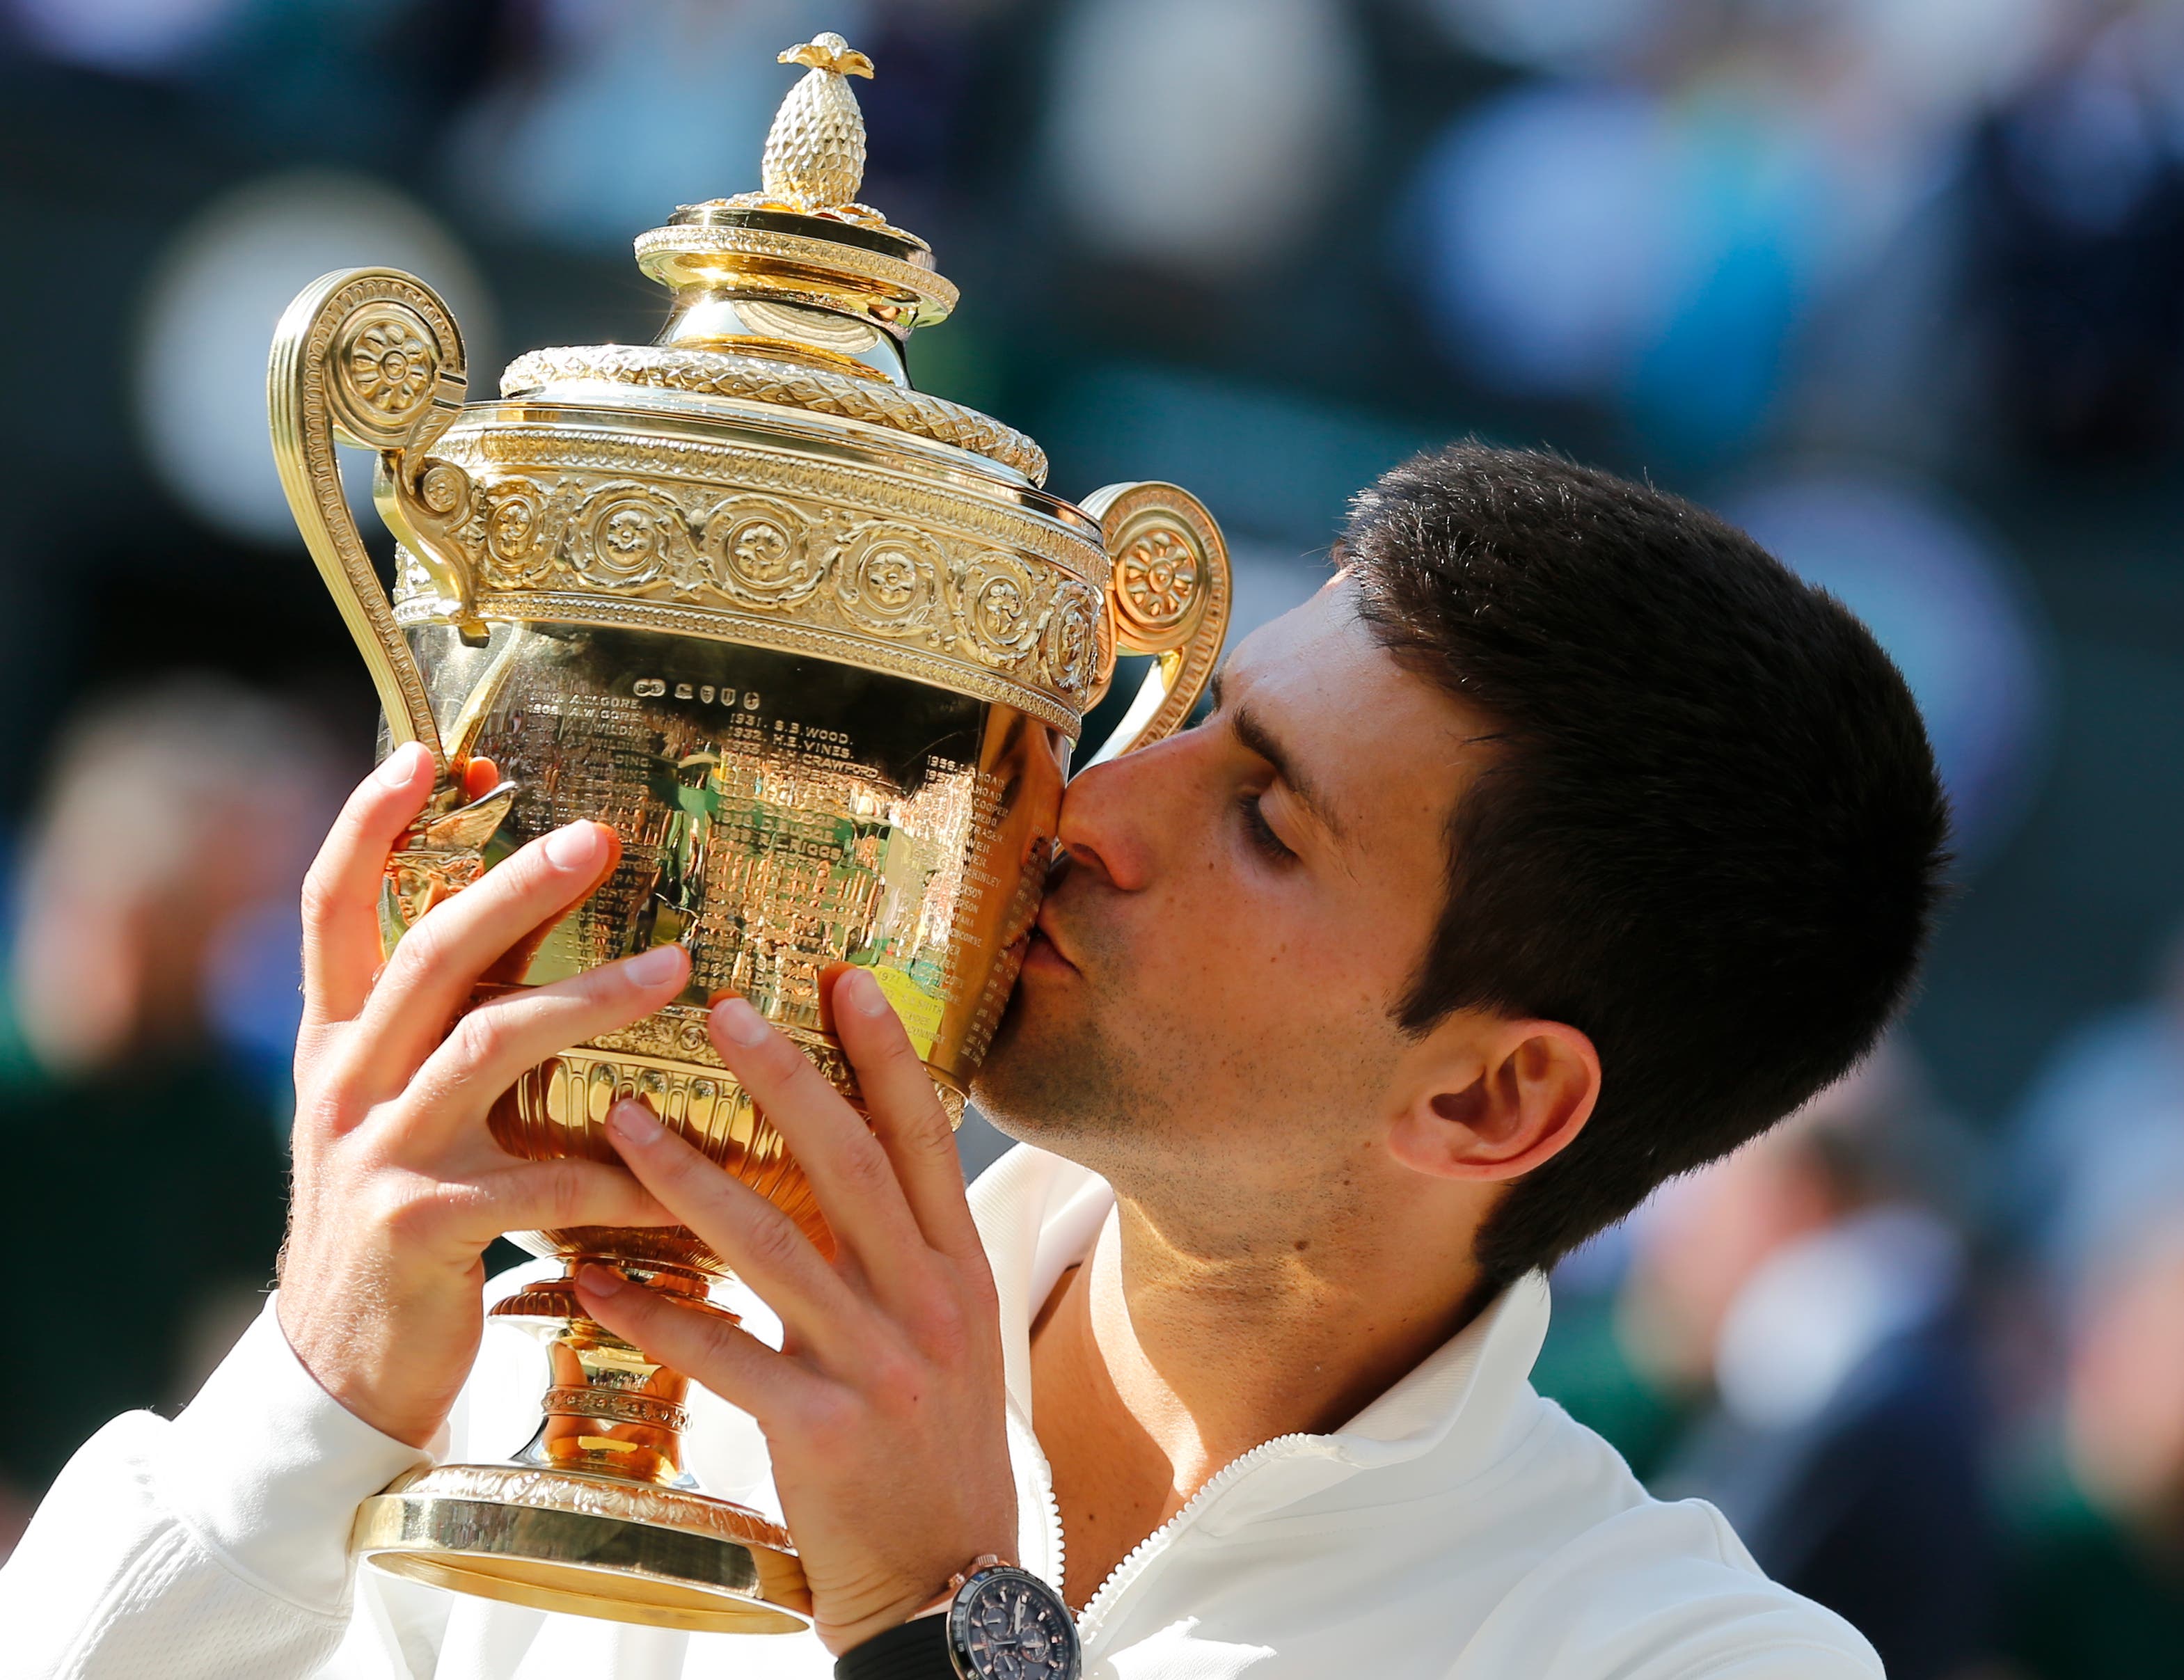 In this July 6, 2014, file photo, Novak Djokovic of Serbia kisses the trophy after defeating Roger Federer of Switzerland in the men's singles final at the All England Lawn Tennis Championships in Wimbledon, London. Heading into the U.S. Open, Roger Federer, Rafael Nadal, Djokovic and Andy Murray have won 36 of the past 38 Grand Slam titles, a stretch dating to the 2005 French Open. Nowadays, there seems to be a growing sense _ or hope, maybe _ among the best of the rest on the men's tennis tour that the quartet might be more vulnerable than ever. (AP Photo/Ben Curtis, File)